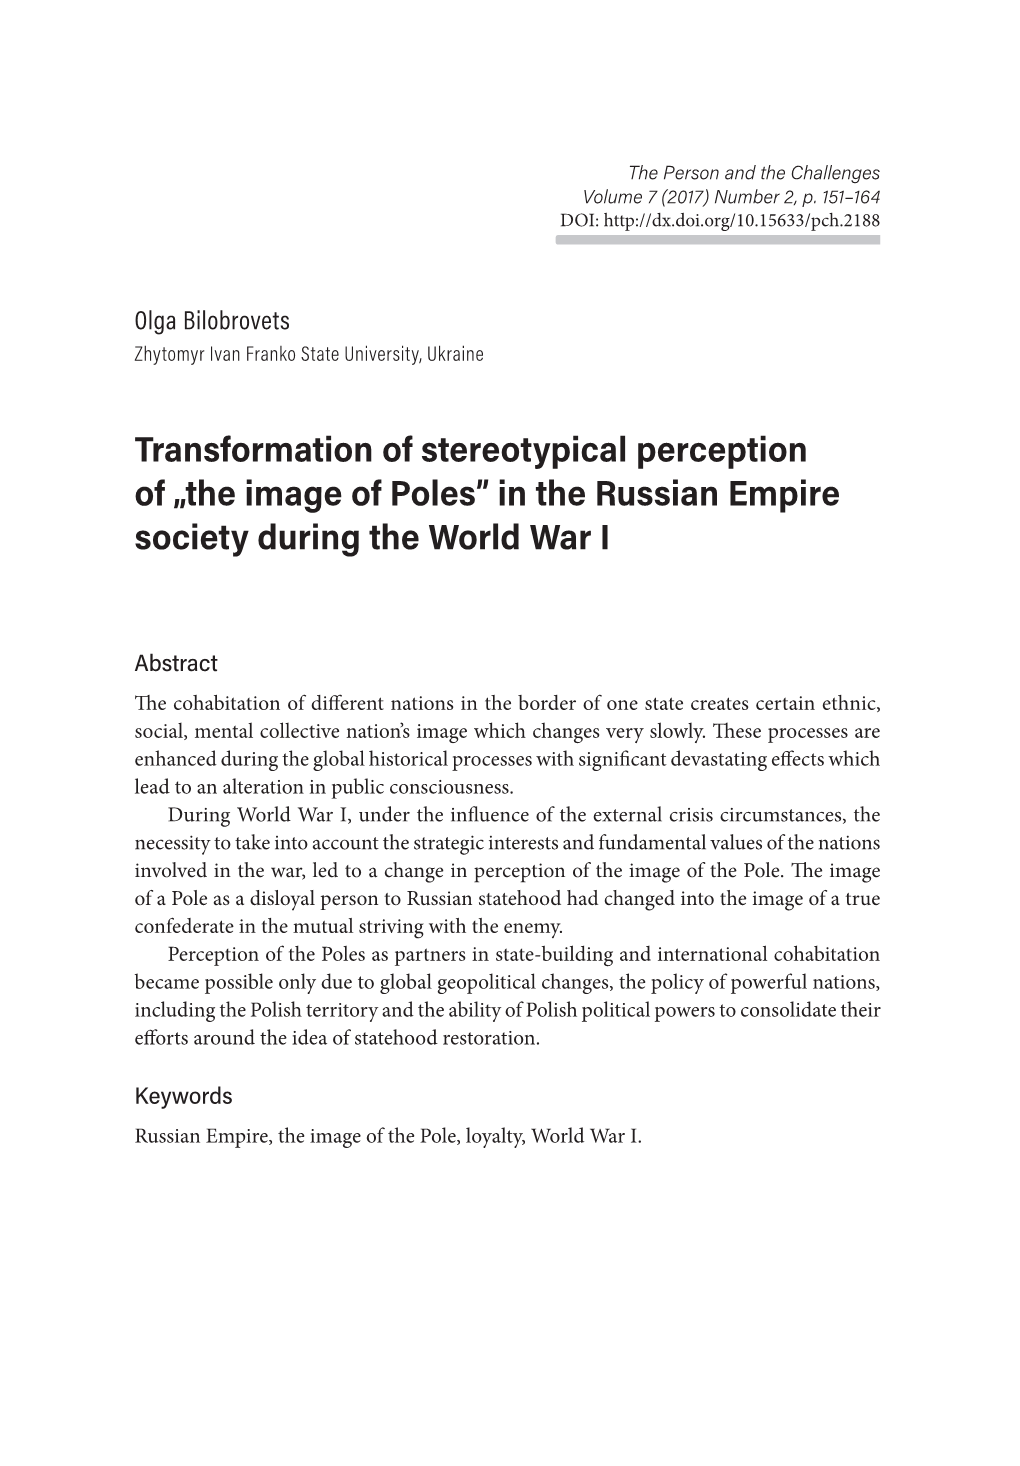 Transformation of Stereotypical Perception of „The Image of Poles” in the Russian Empire Society During the World War I